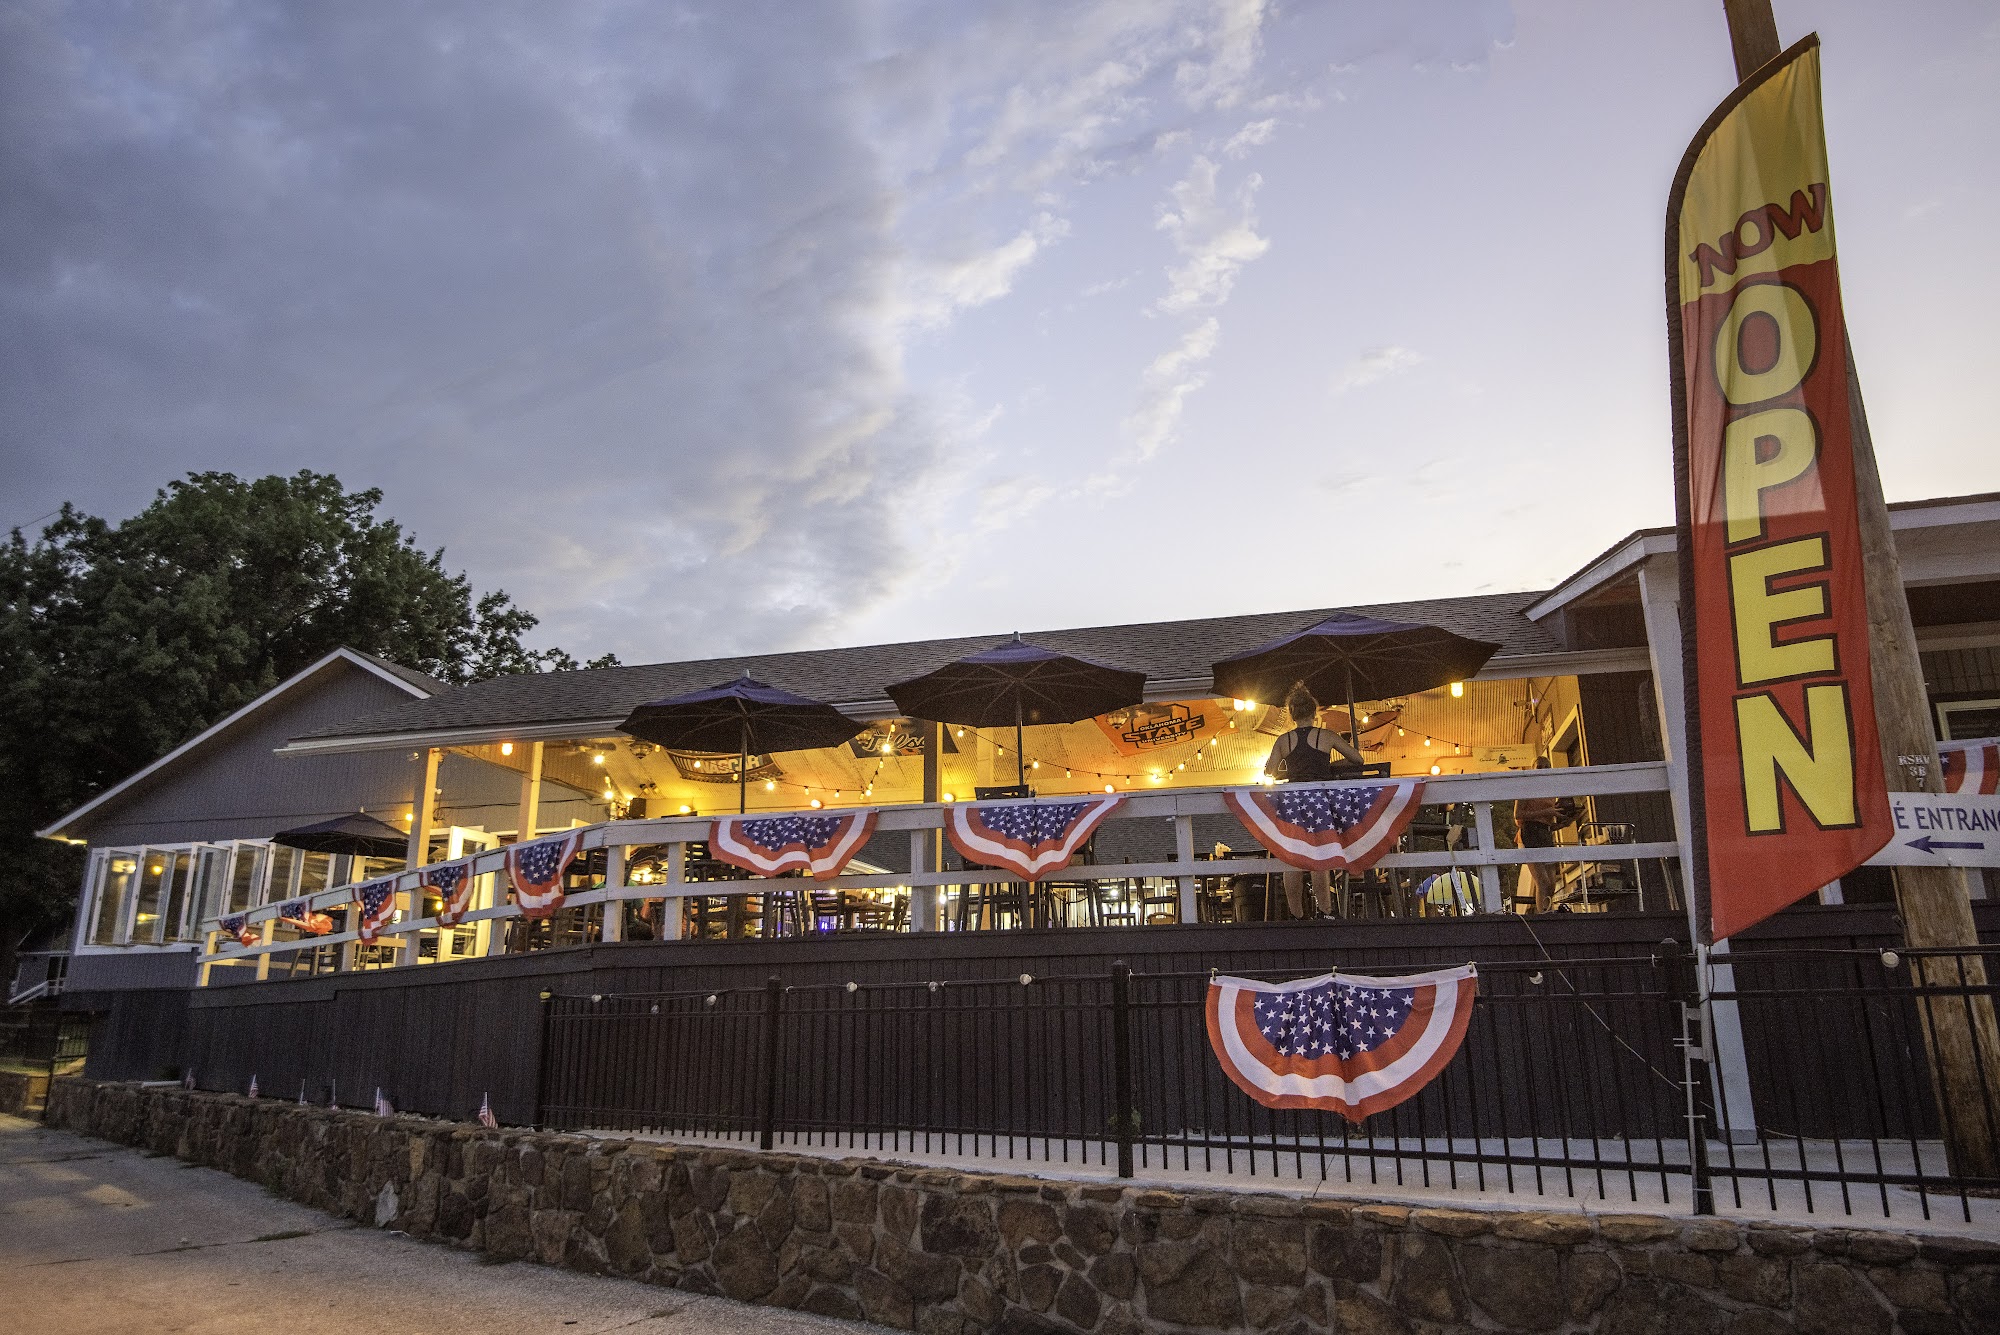 The Quarterdeck Waterfront Cafe